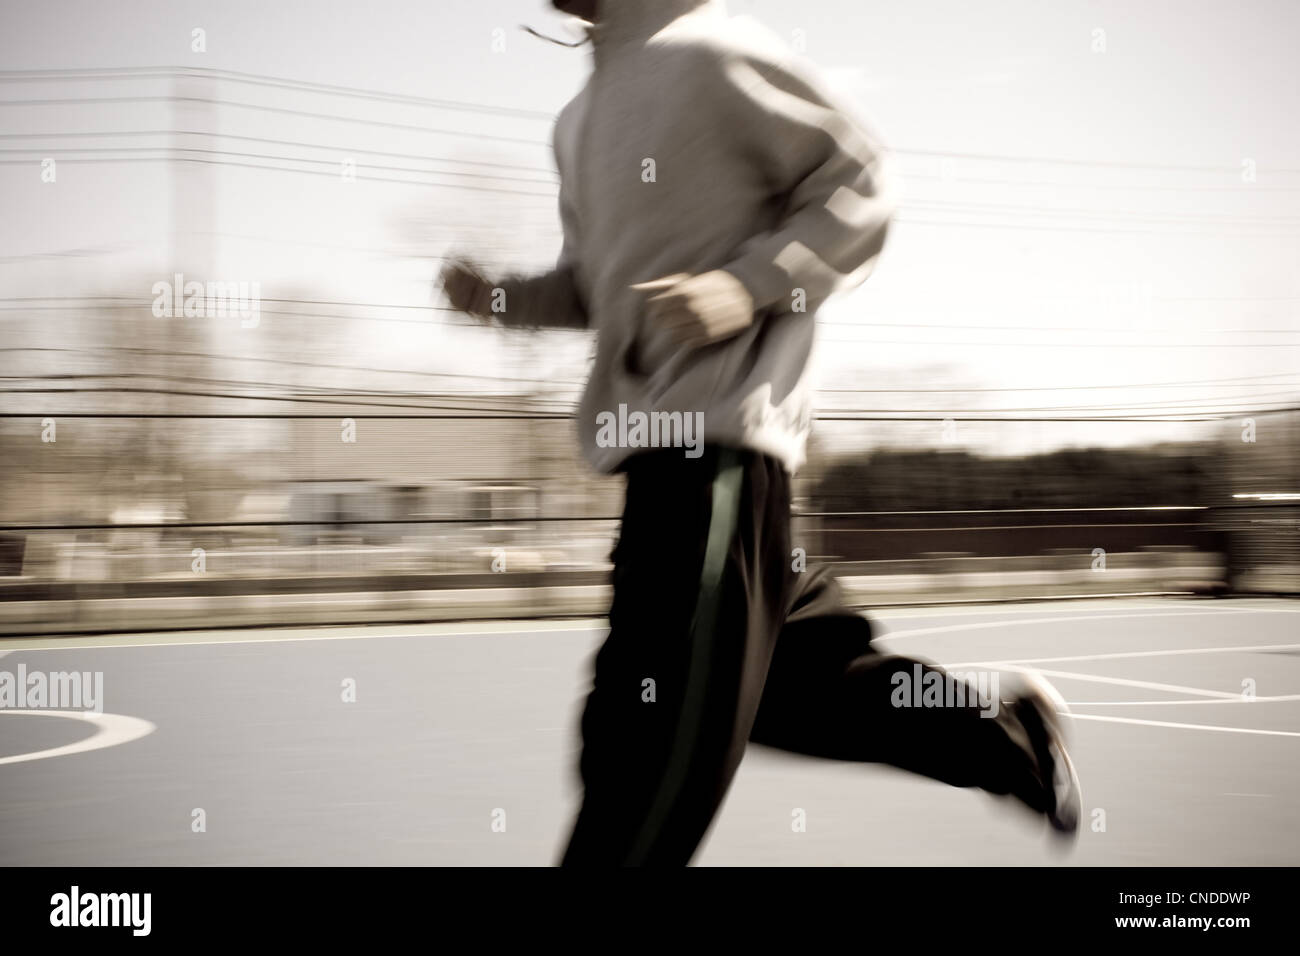 Abstract blur of a young man warming up by jogging at the basketball court. Intentional motion blur. Stock Photo